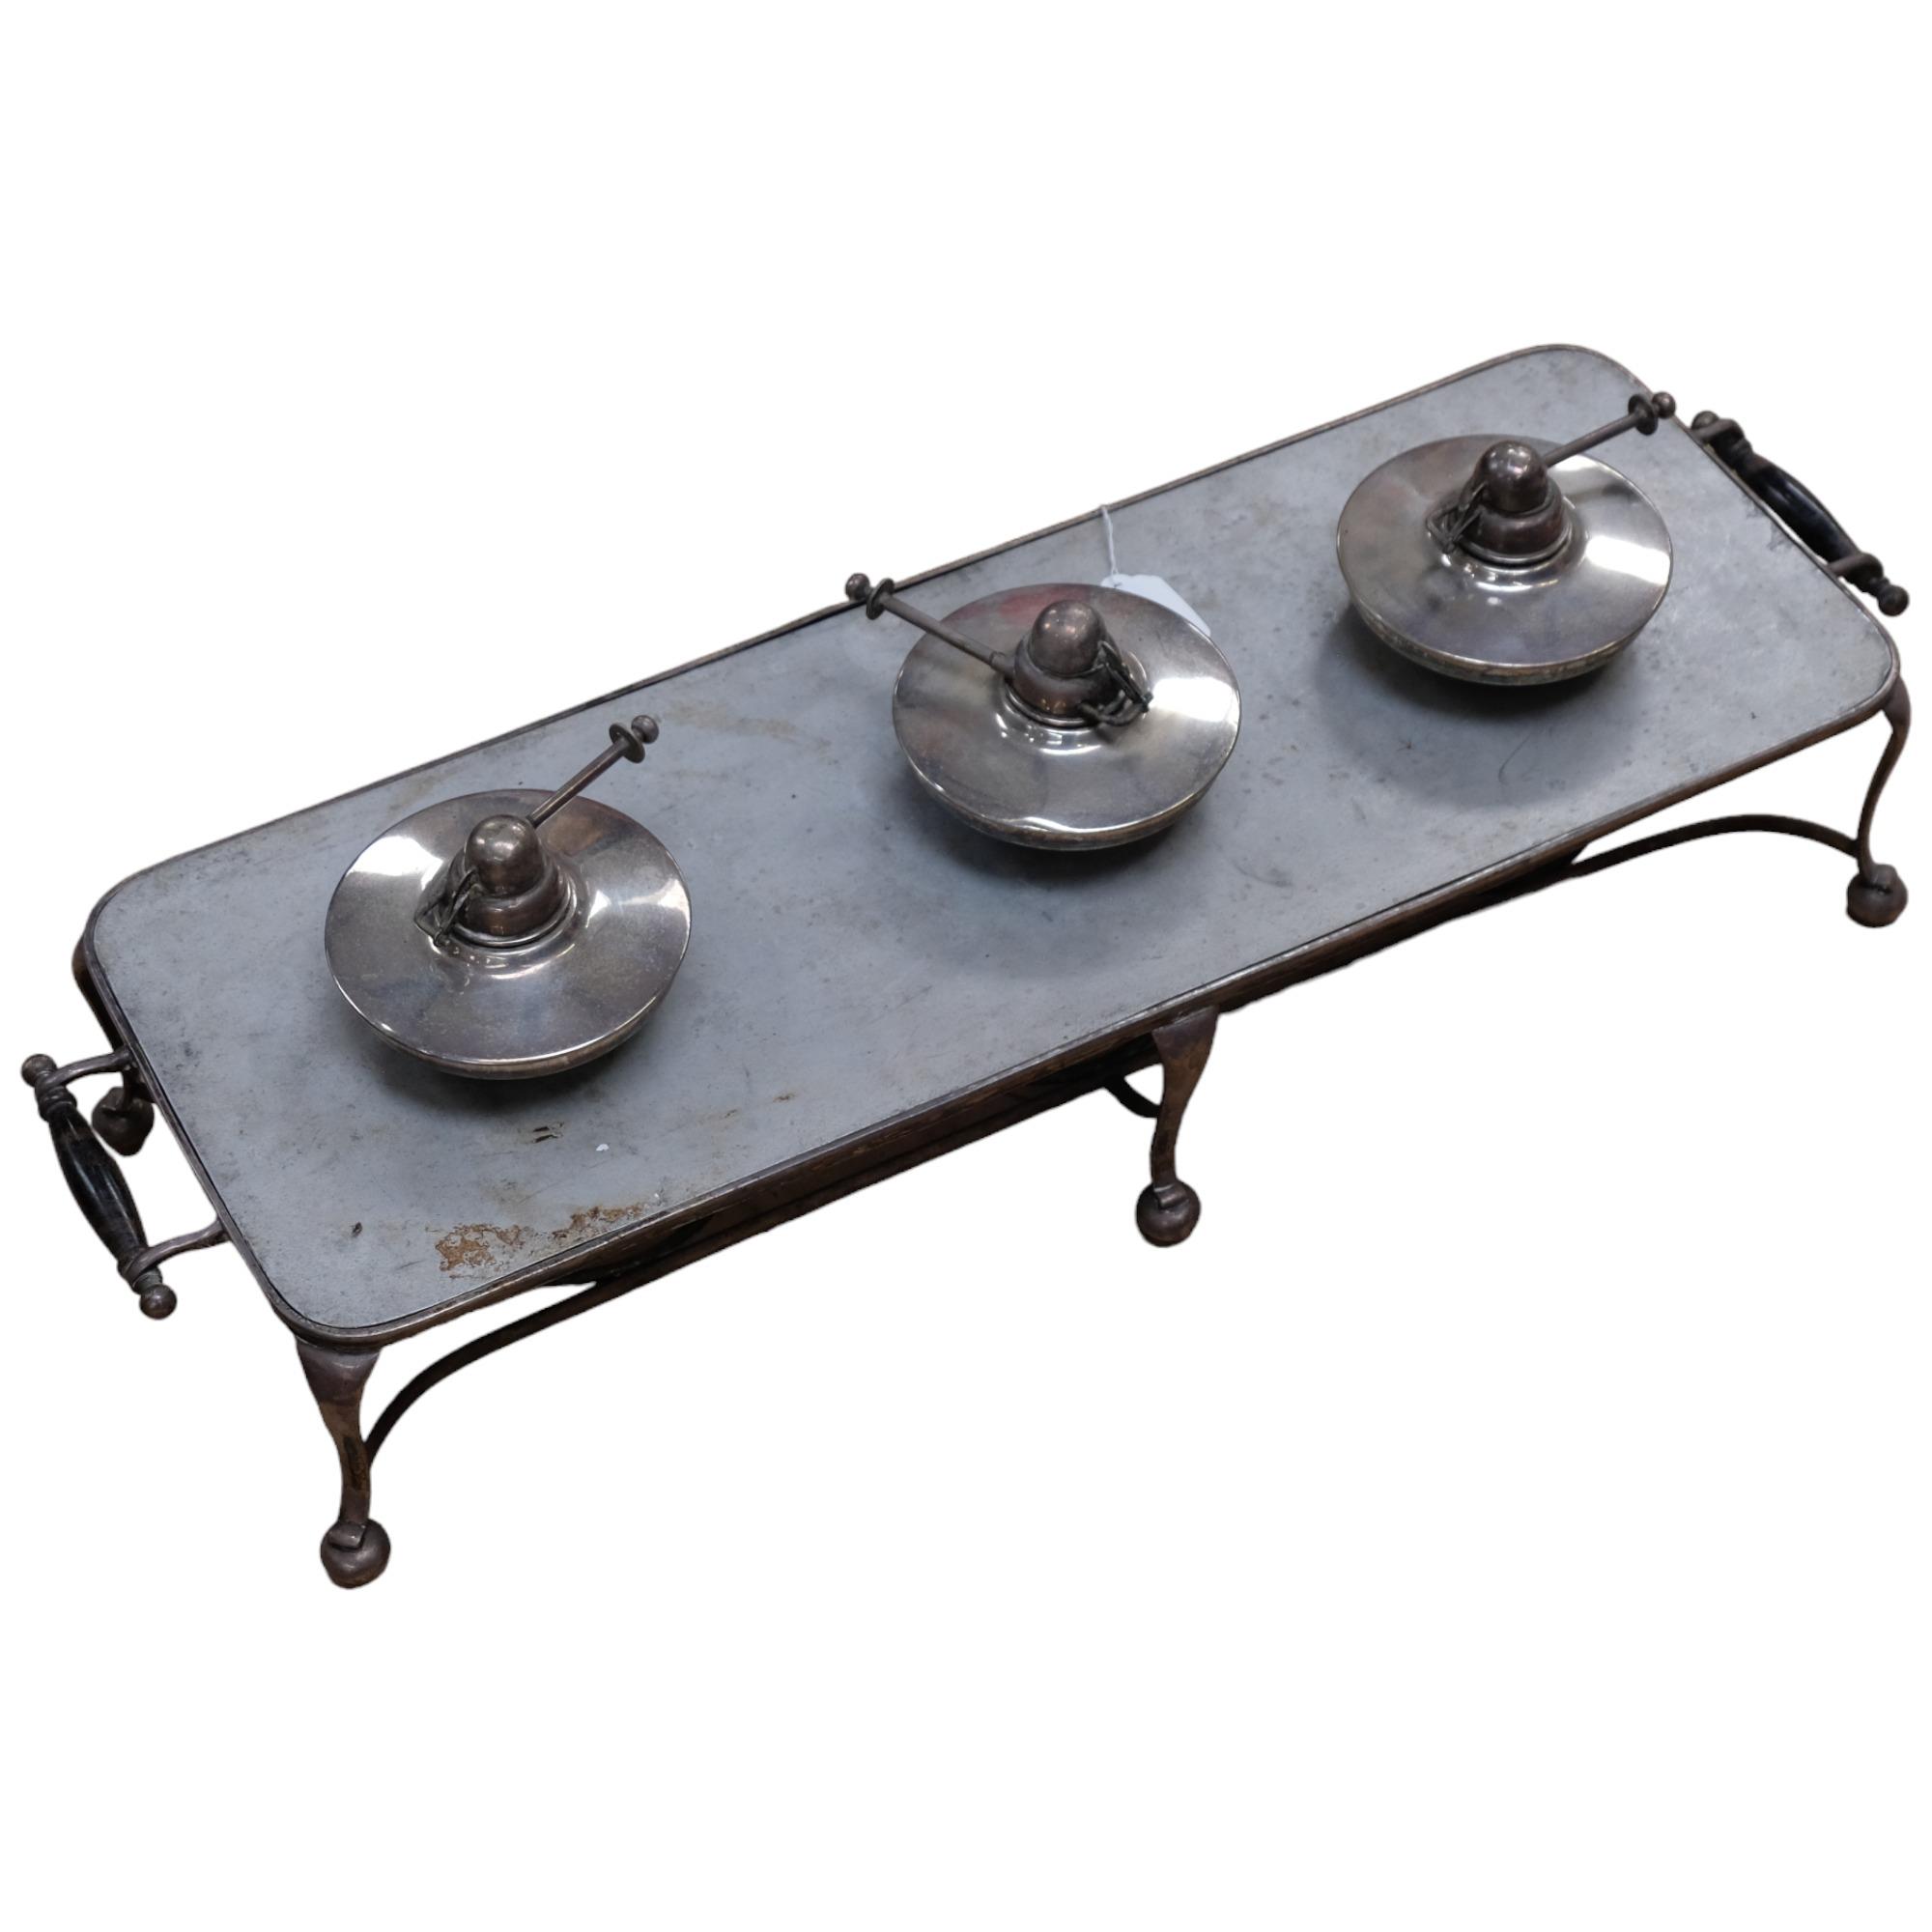 A silver plated warming stand, with turned wood handles, L71cm, and 3 silver plated burners